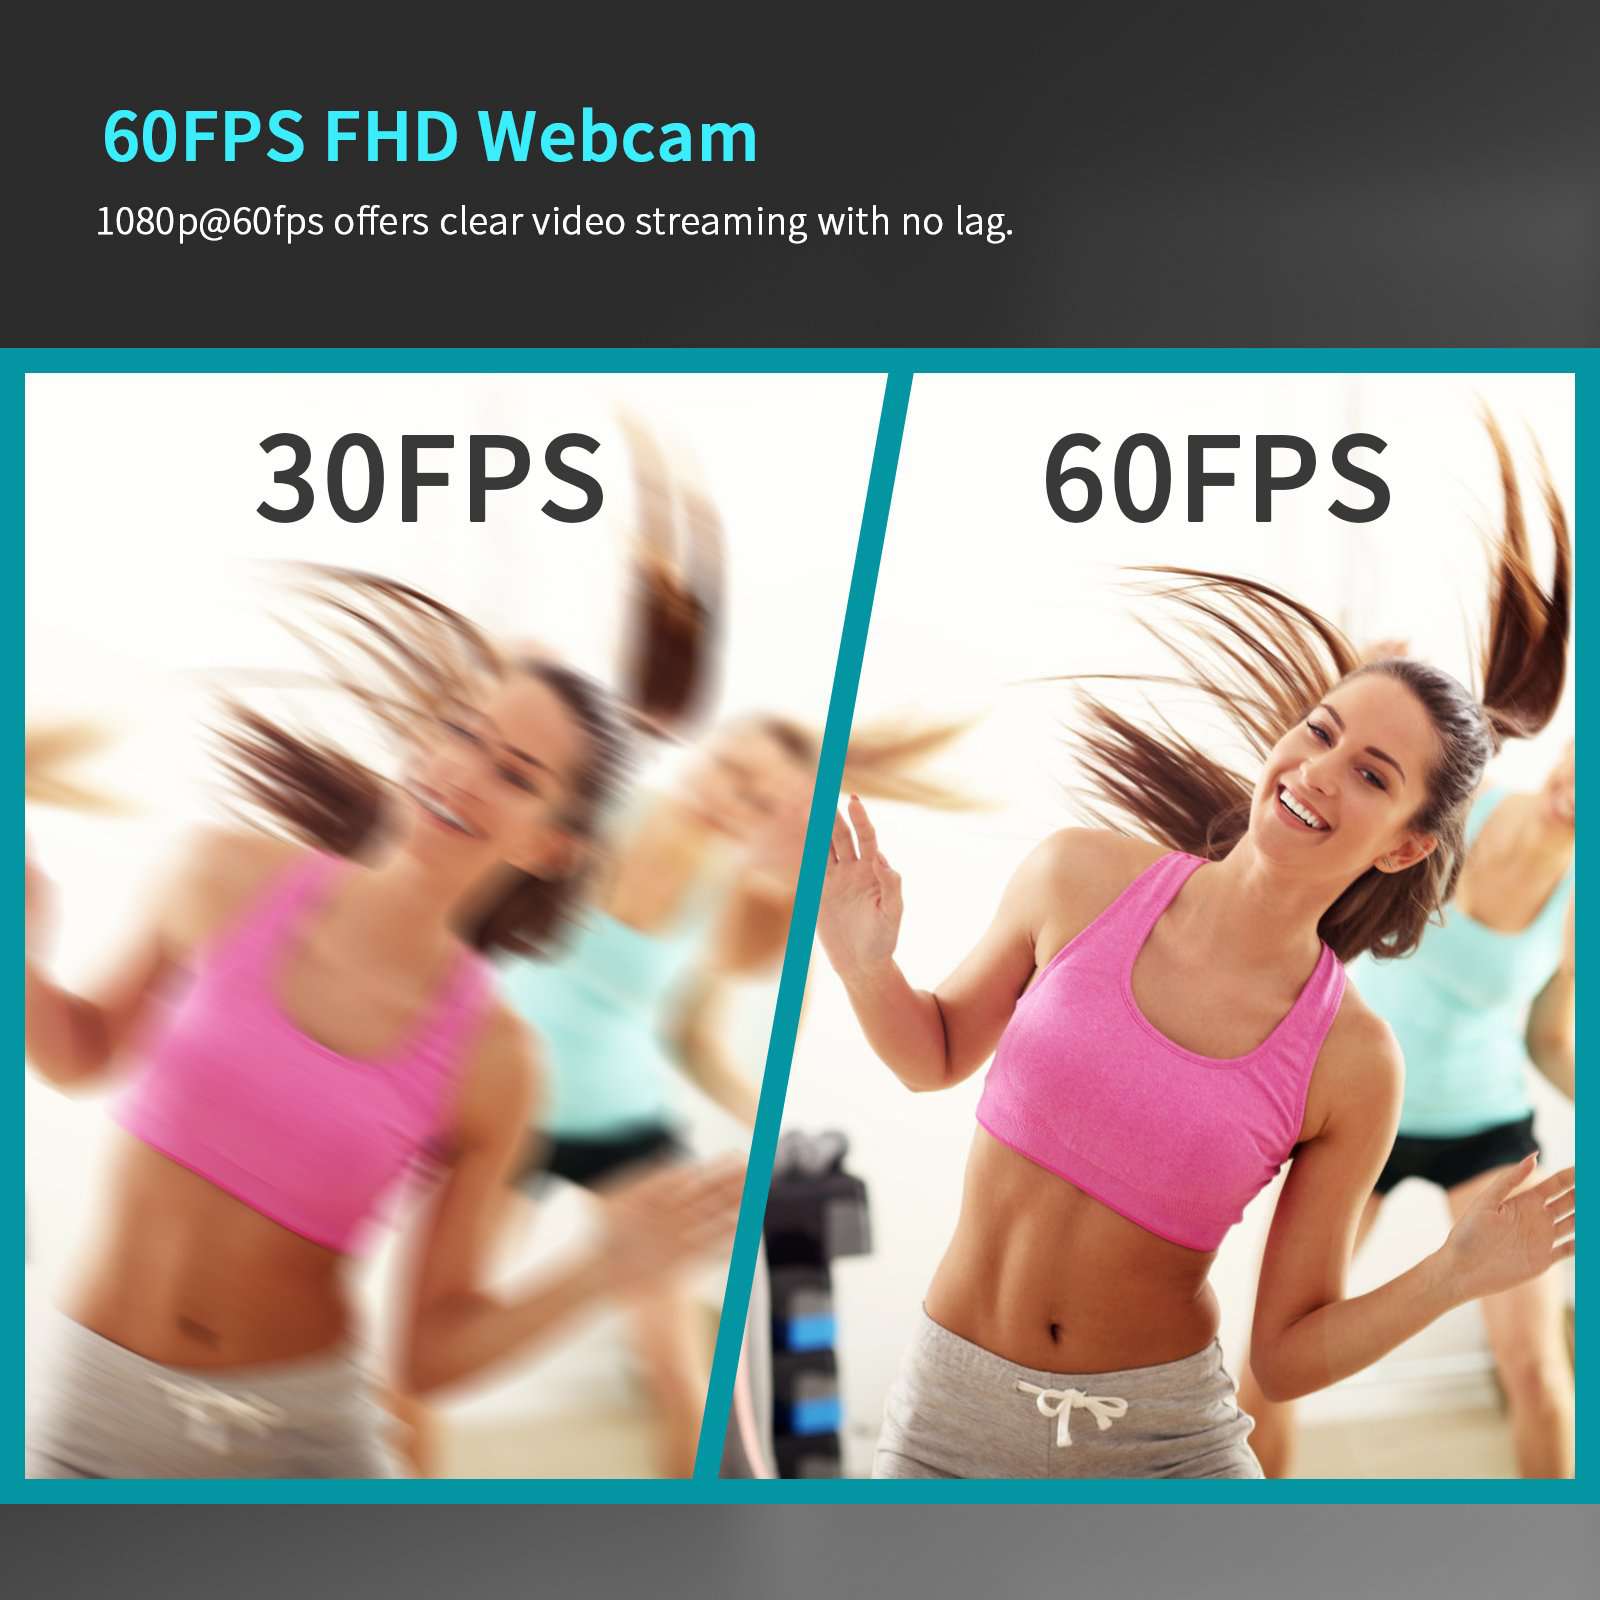 Compared to 30fps, pictures at 60fps are clearer and less blurry.